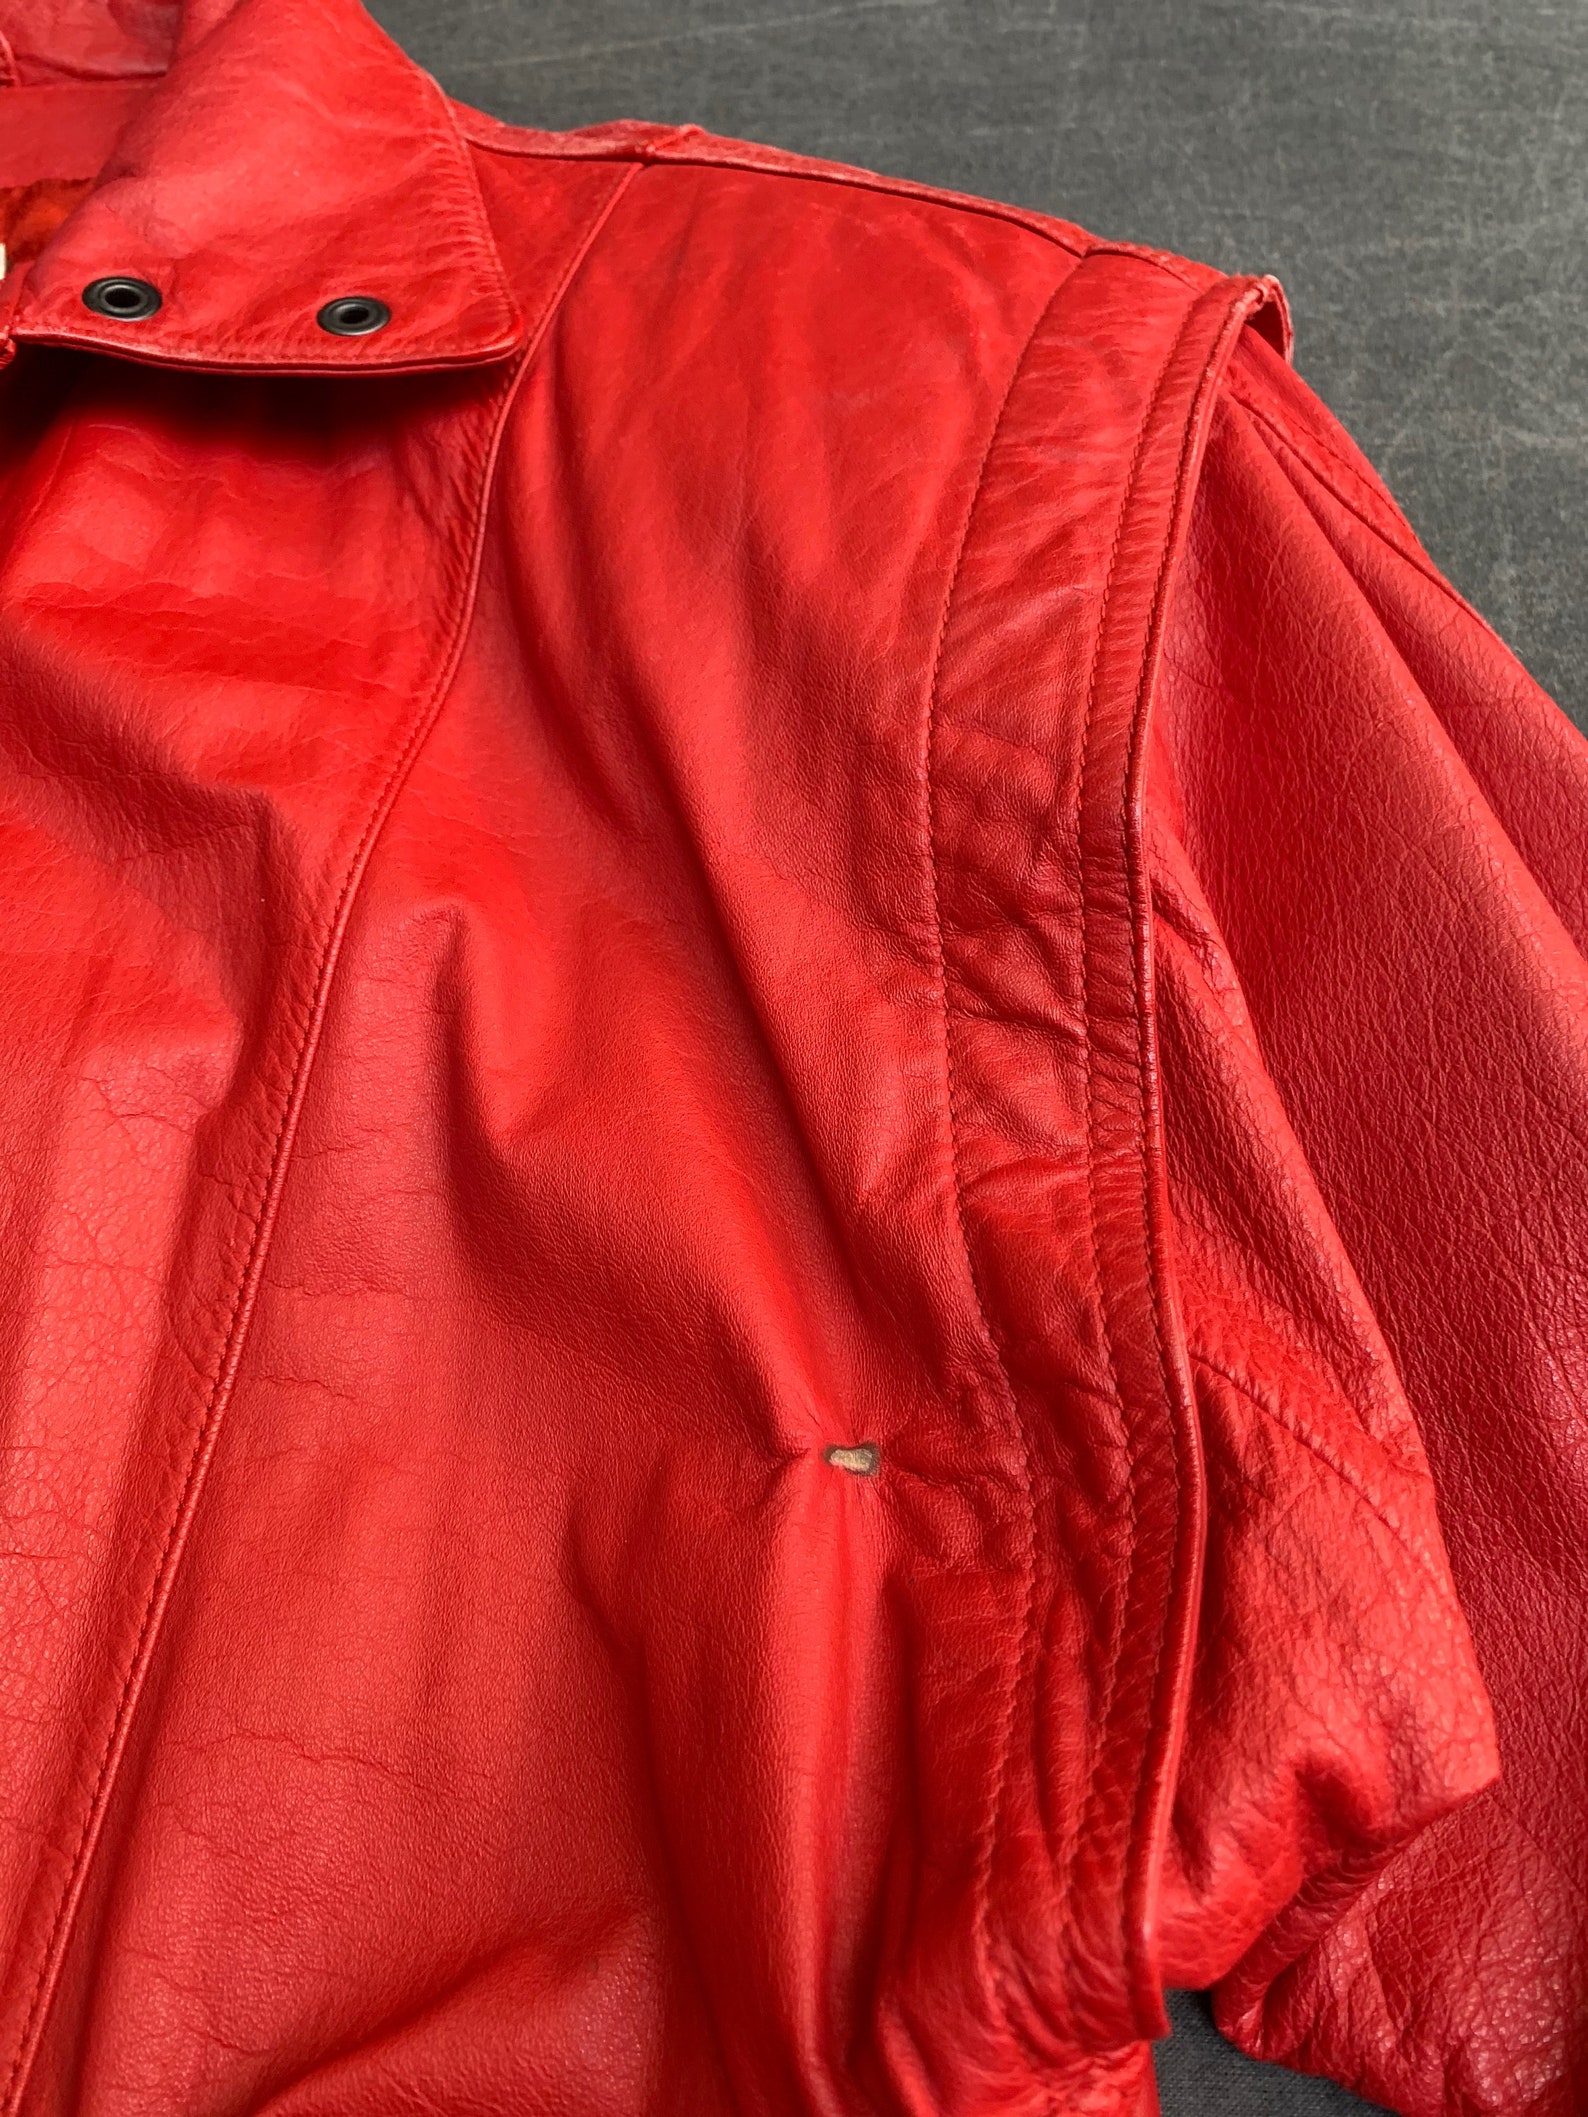 80s Red Leather Jacket by Georgetown Leather Design Michael - Etsy